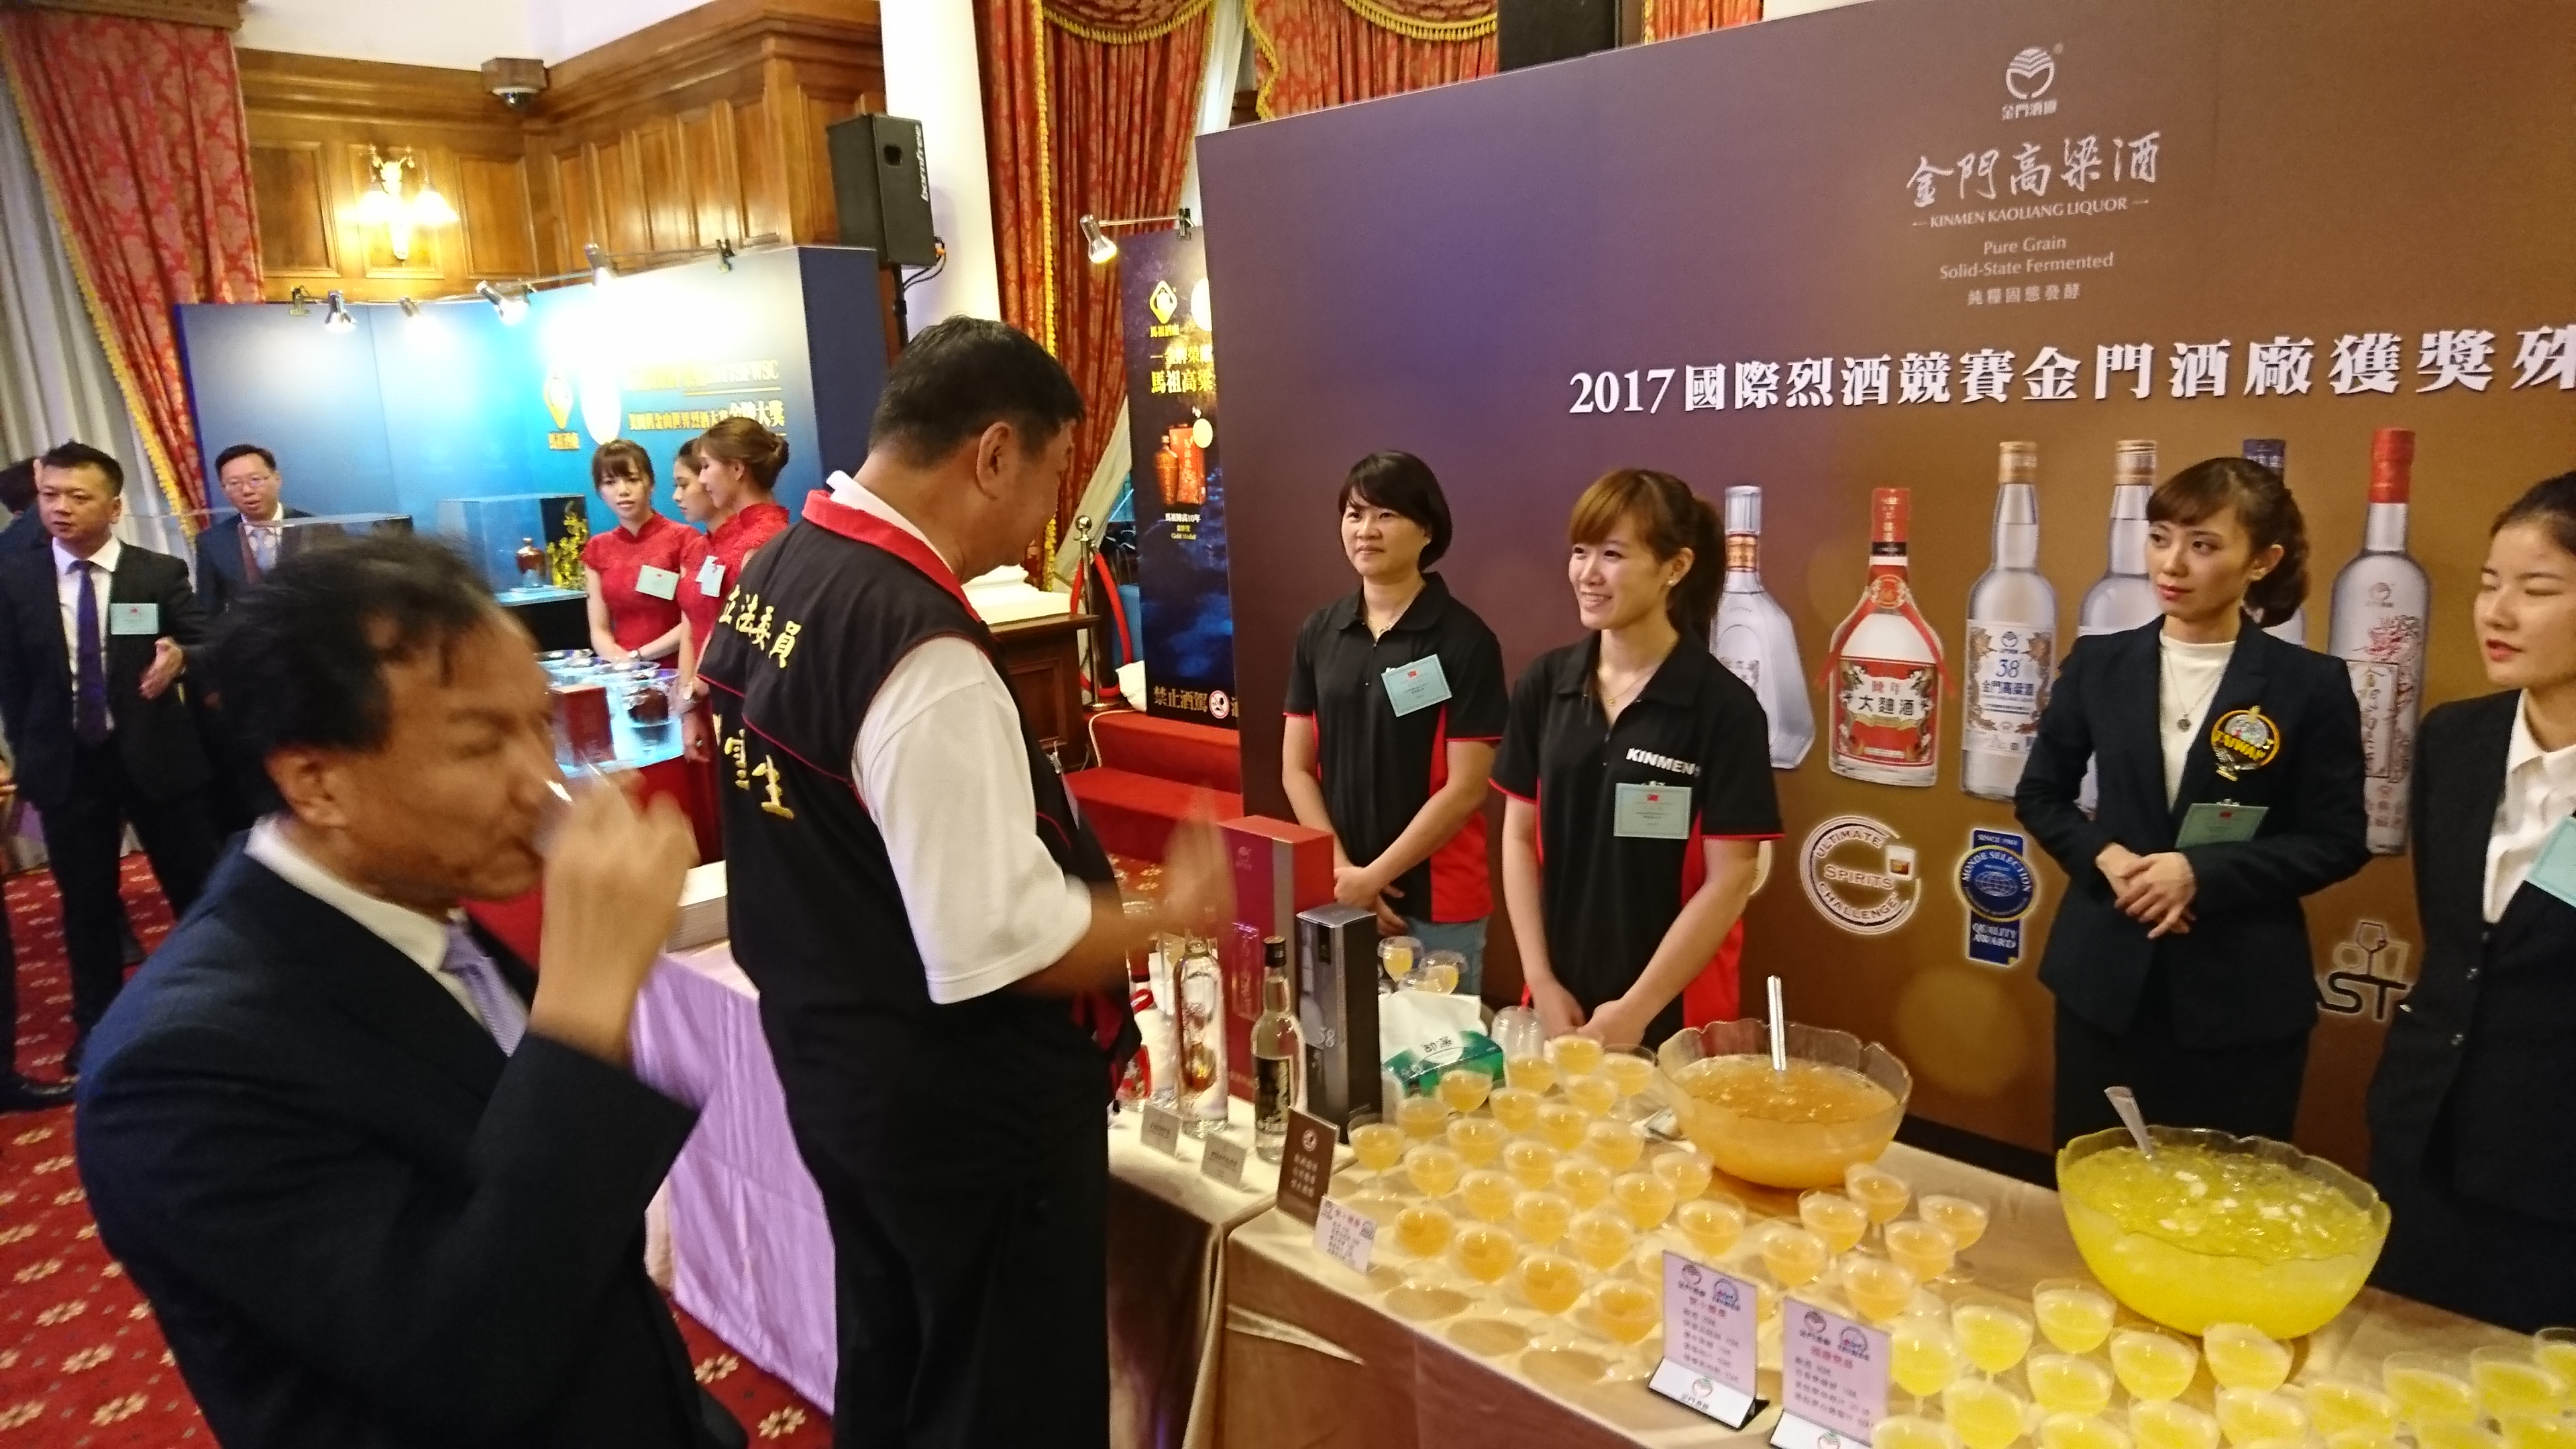 National Day banquet dinner entertains and welcomes guests with KKL liquors